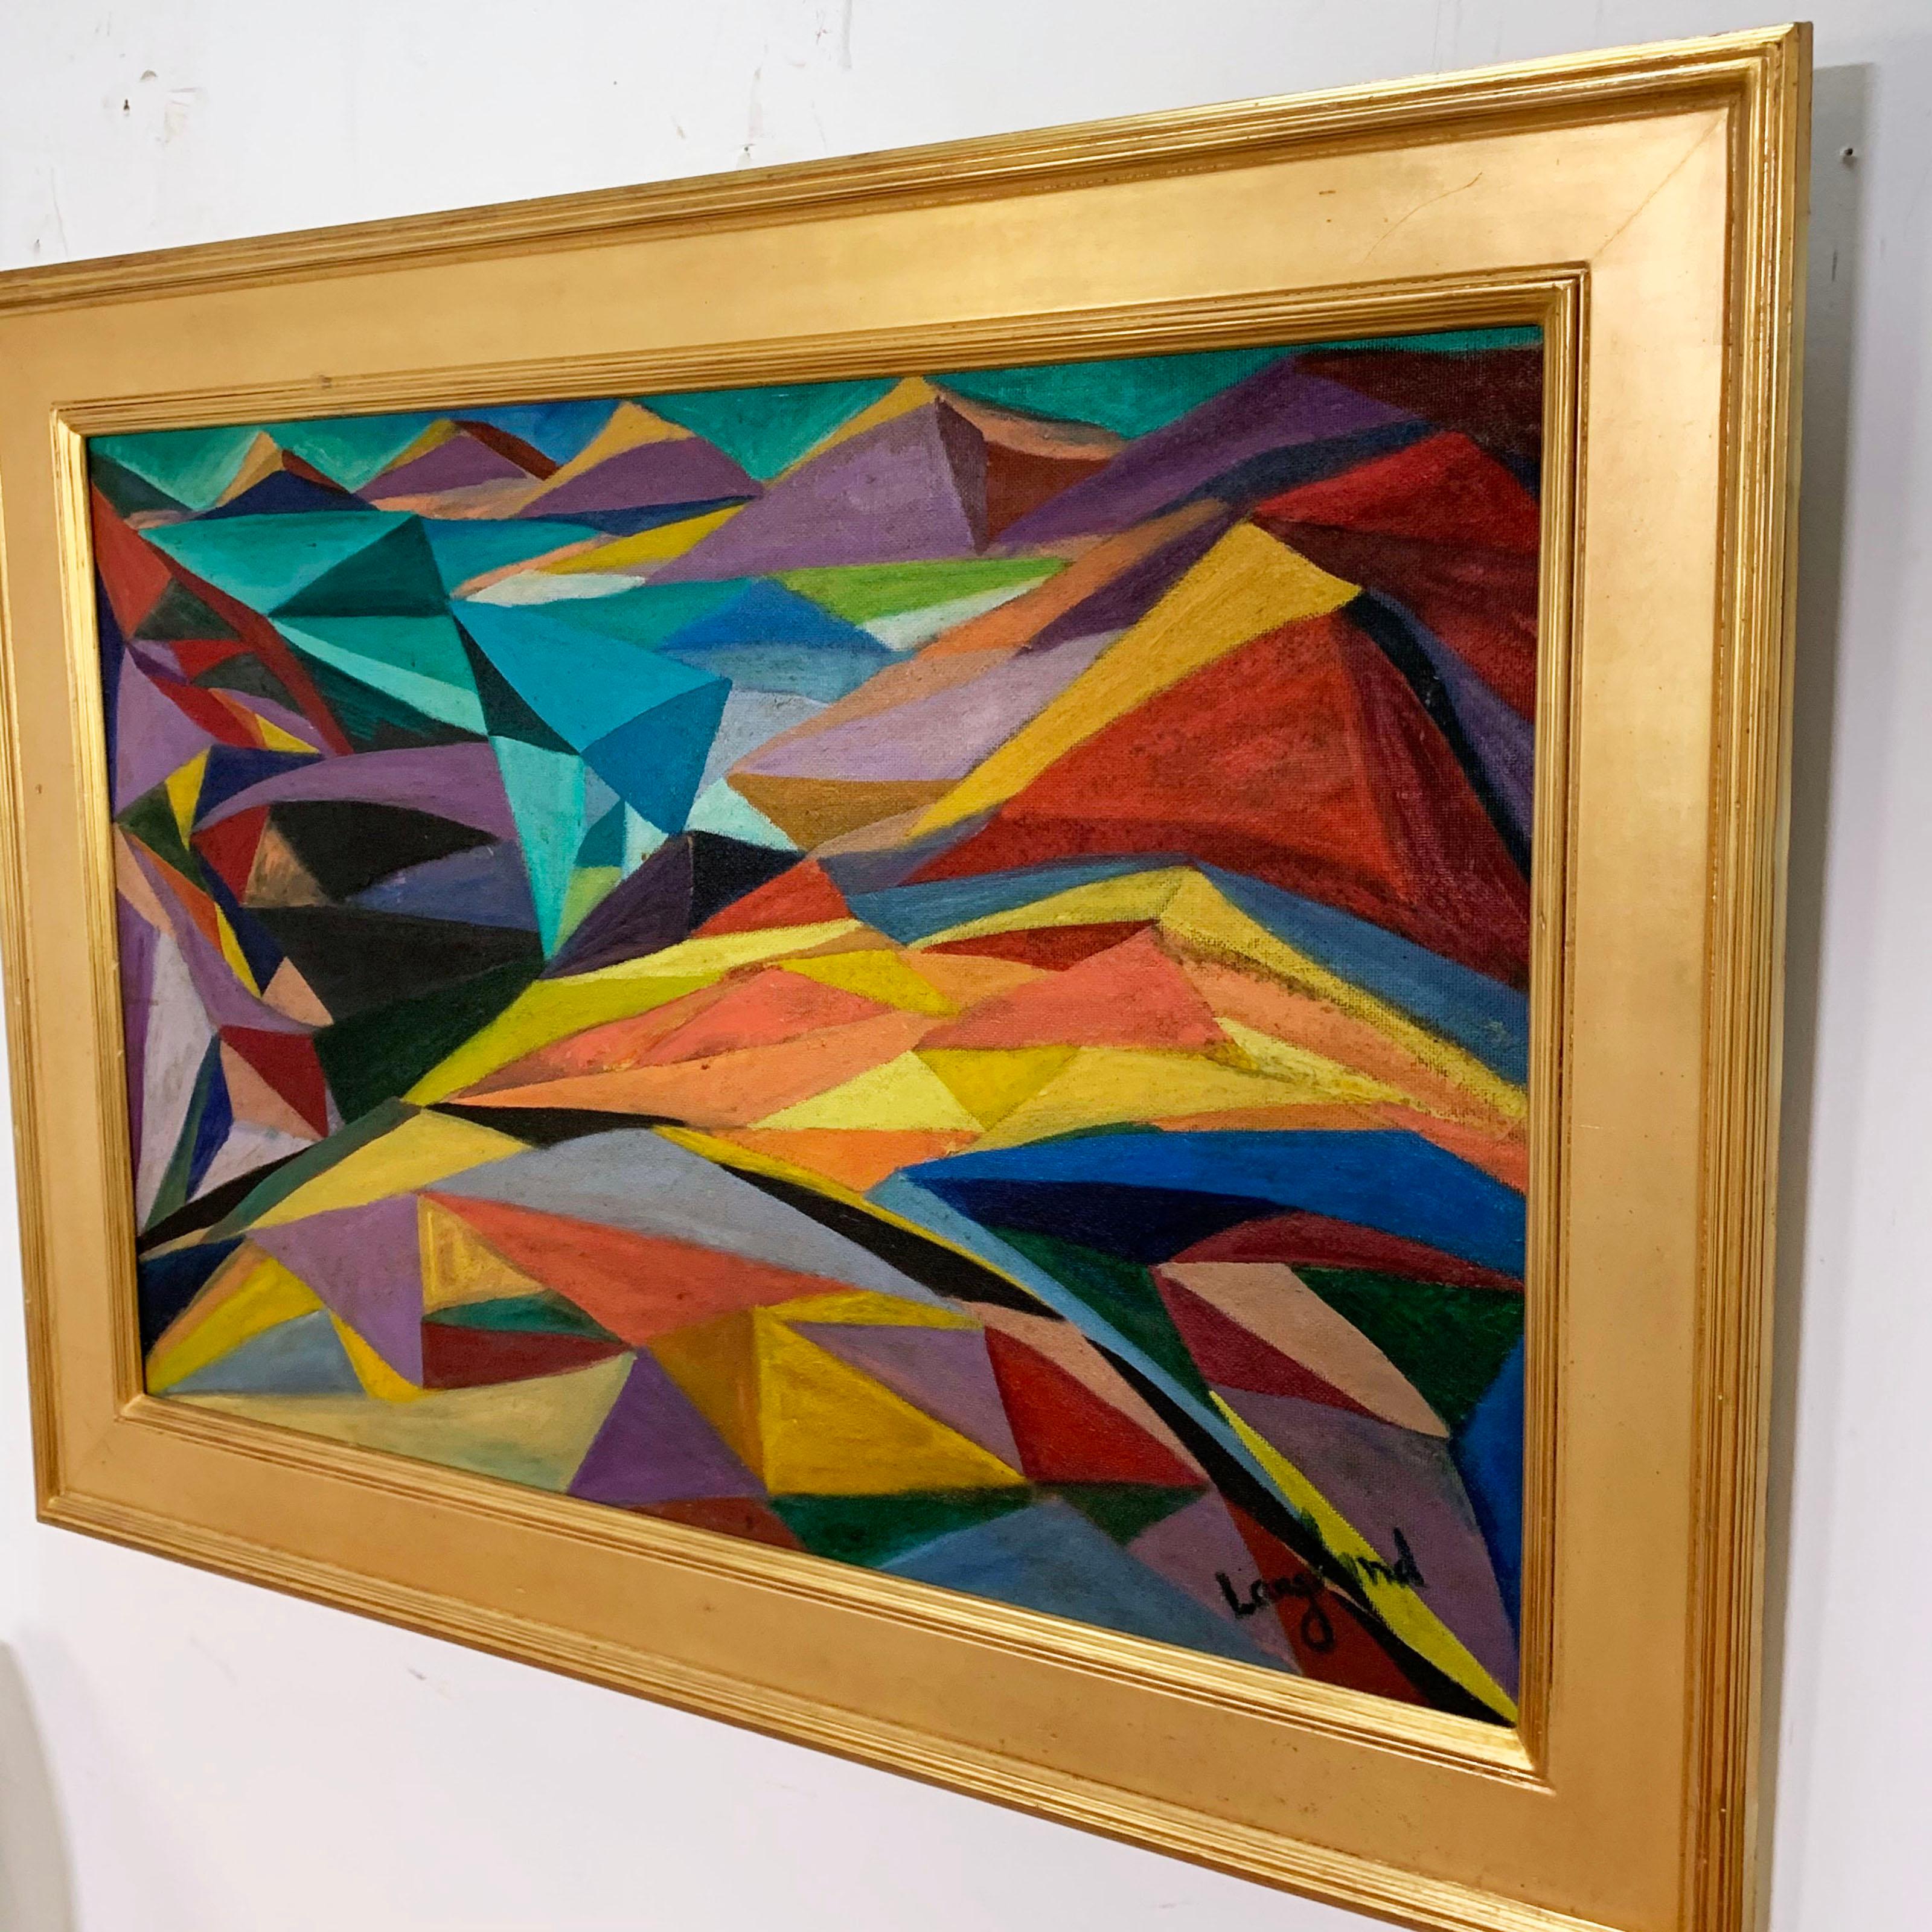 An abstract painting, oil on masonite, circa late 1940s, depicts the landscape of the Laramie, Wyoming river valley with the Medicine Bow Mountains in the distance. The artist, Judith Gail (Wood) Langland was the wife of the famous American poet